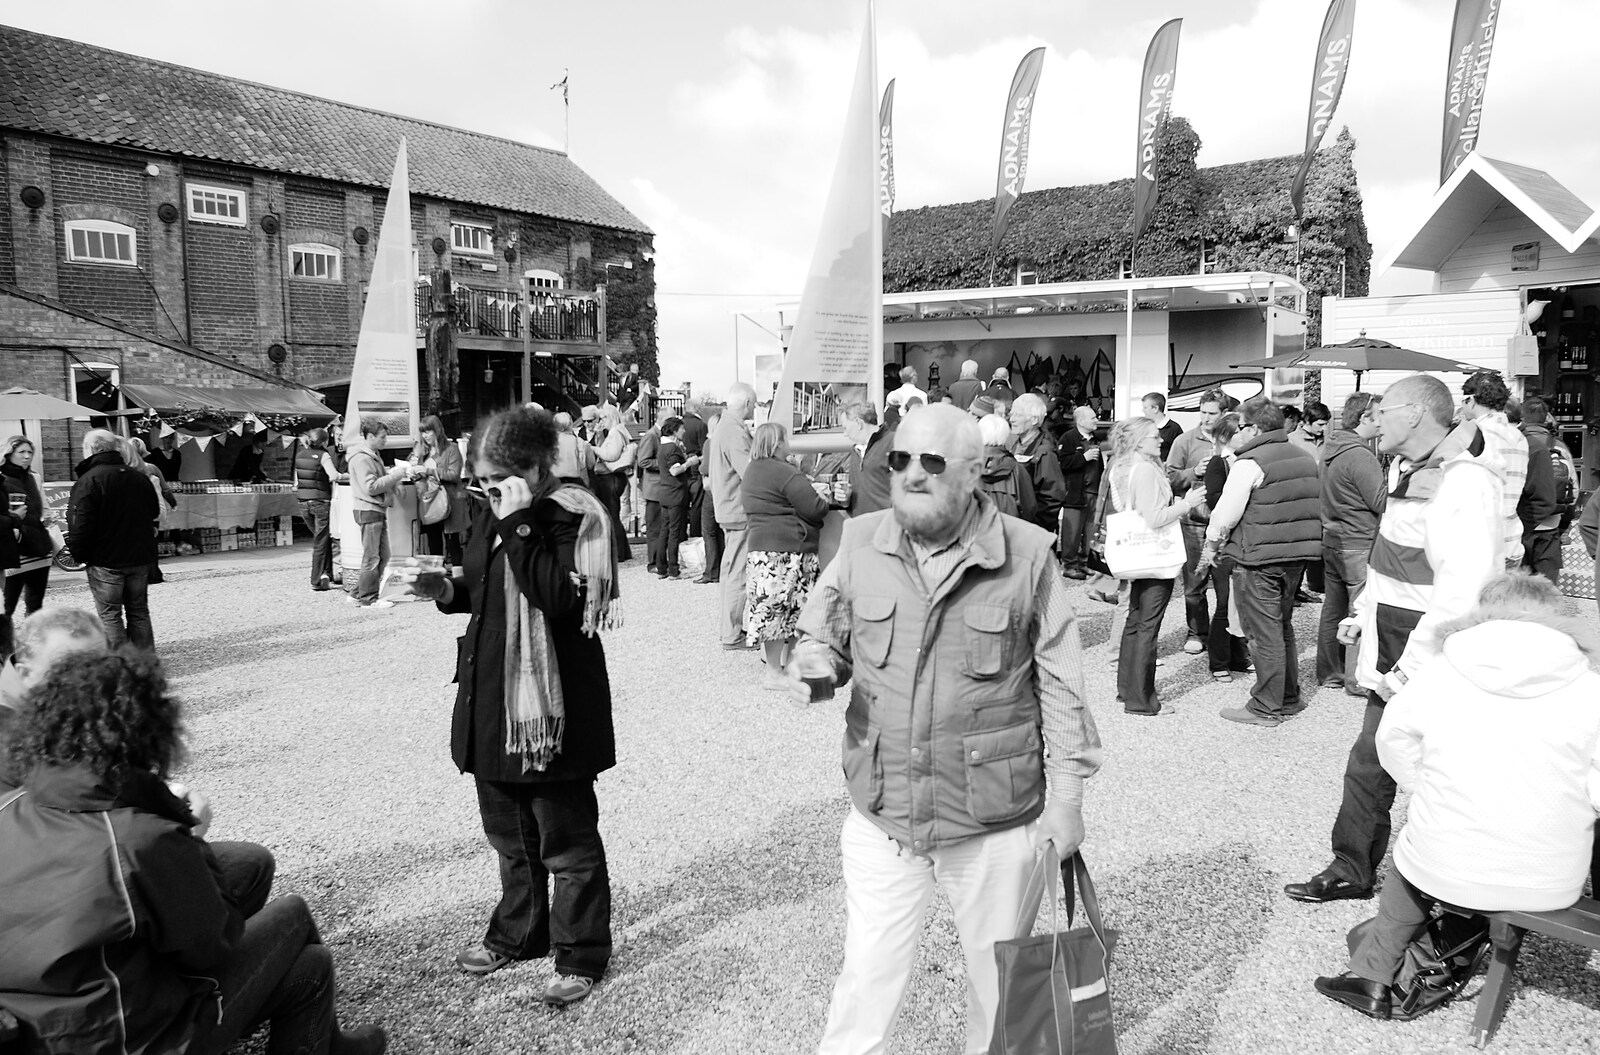 The Aldeburgh Food Festival, Snape Maltings, Suffolk - 25th September 2010: People with beer mill around